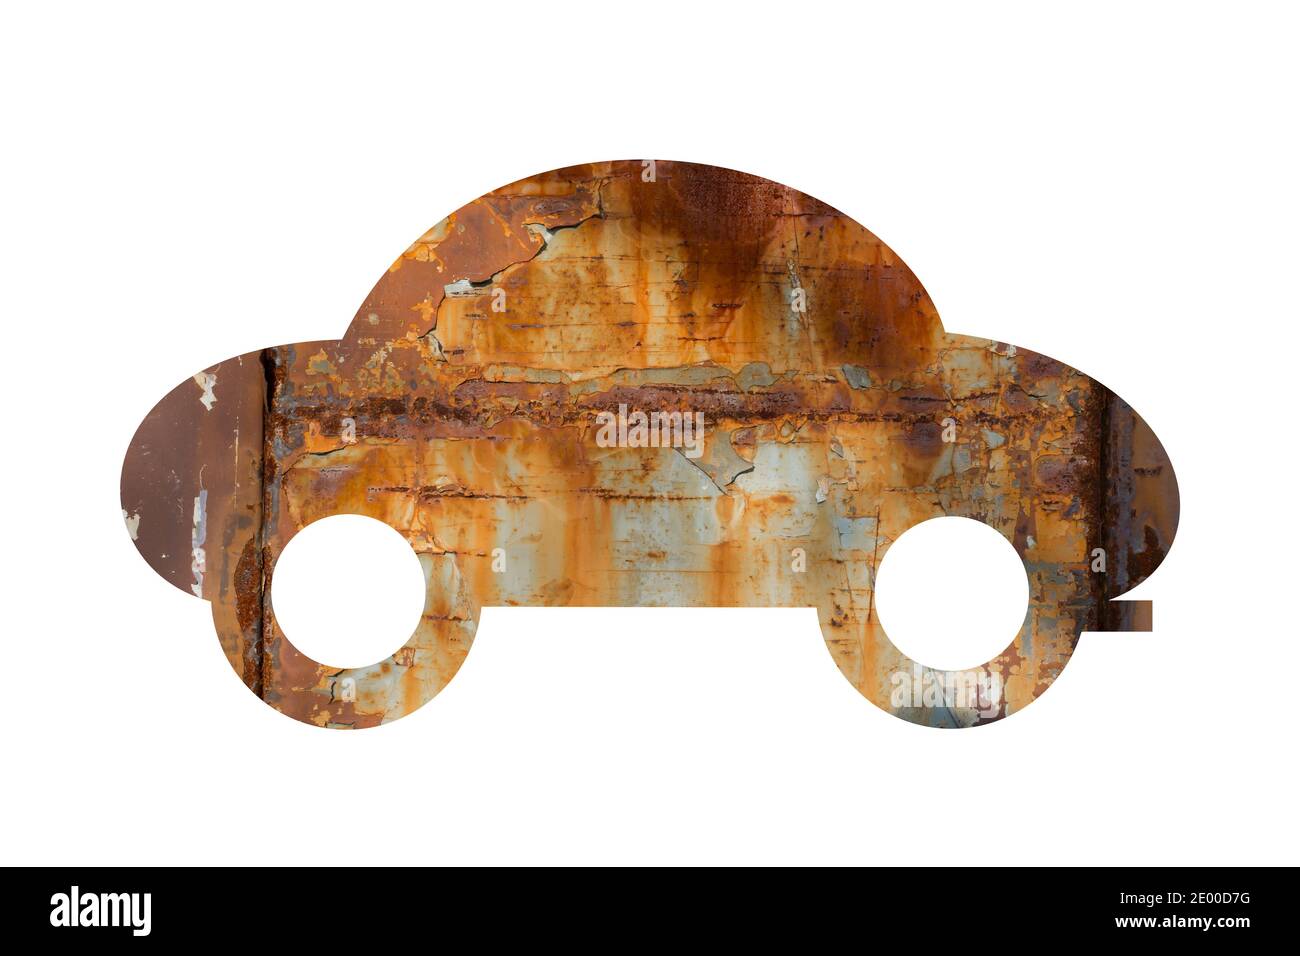 Old car is rusty and corroded. Aged vehicle in bad and porr condition after being abandoned and neglected. Illustration isolated on white Stock Photo